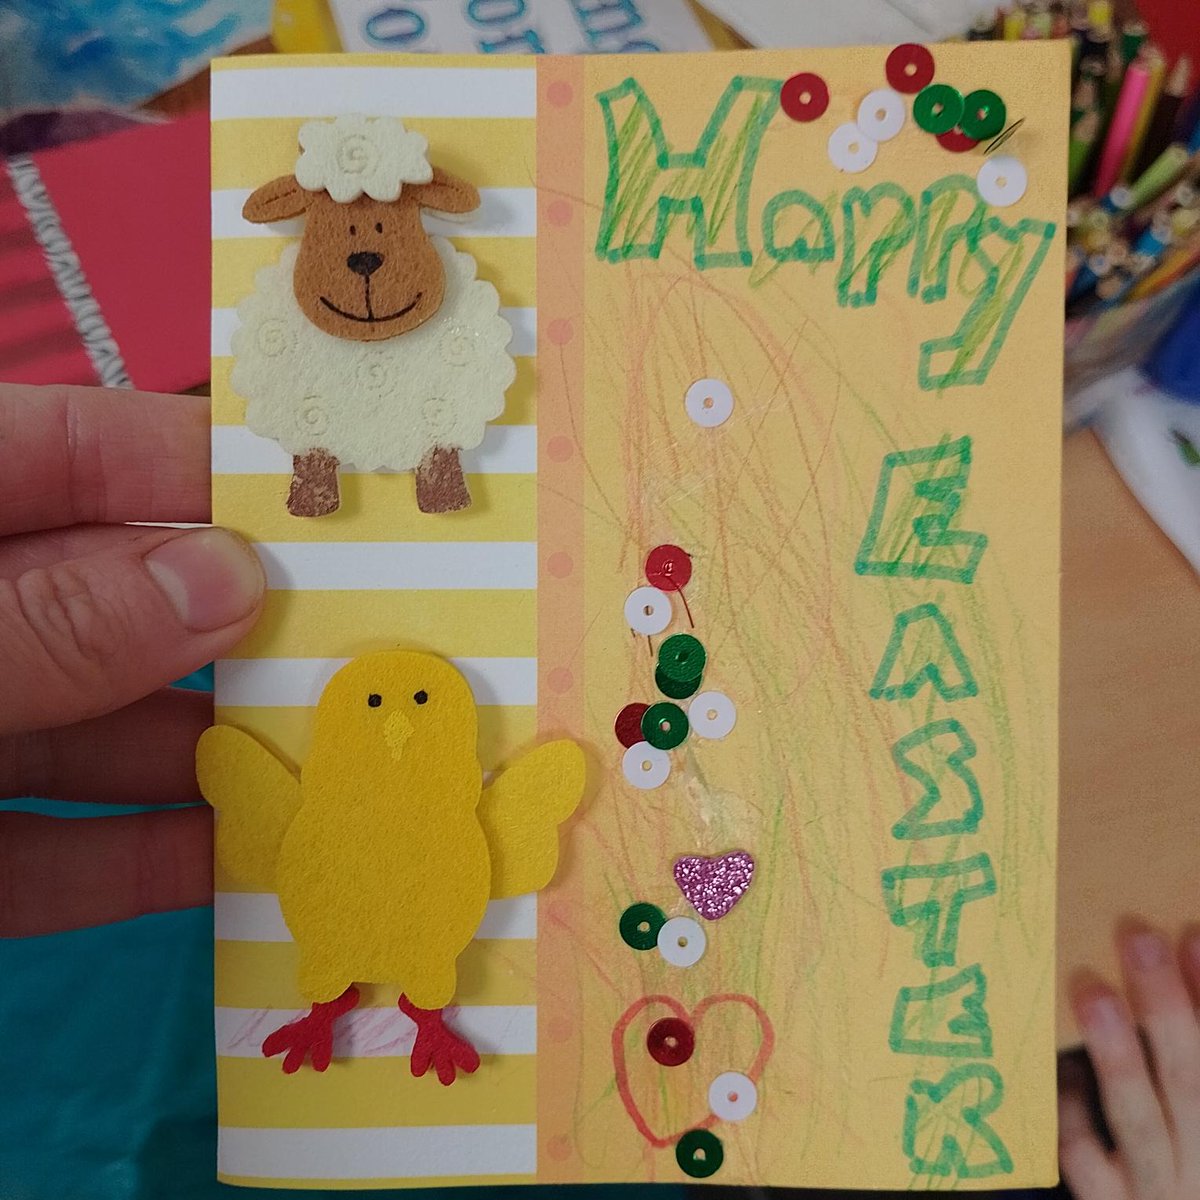 Kyle was in a creative mood so decided to create a Easter card for his mum and sister, with a little bit of help from Paris. The card included a personalised hand written message, and we think it looks amazing! #AutismAcceptenceWeek